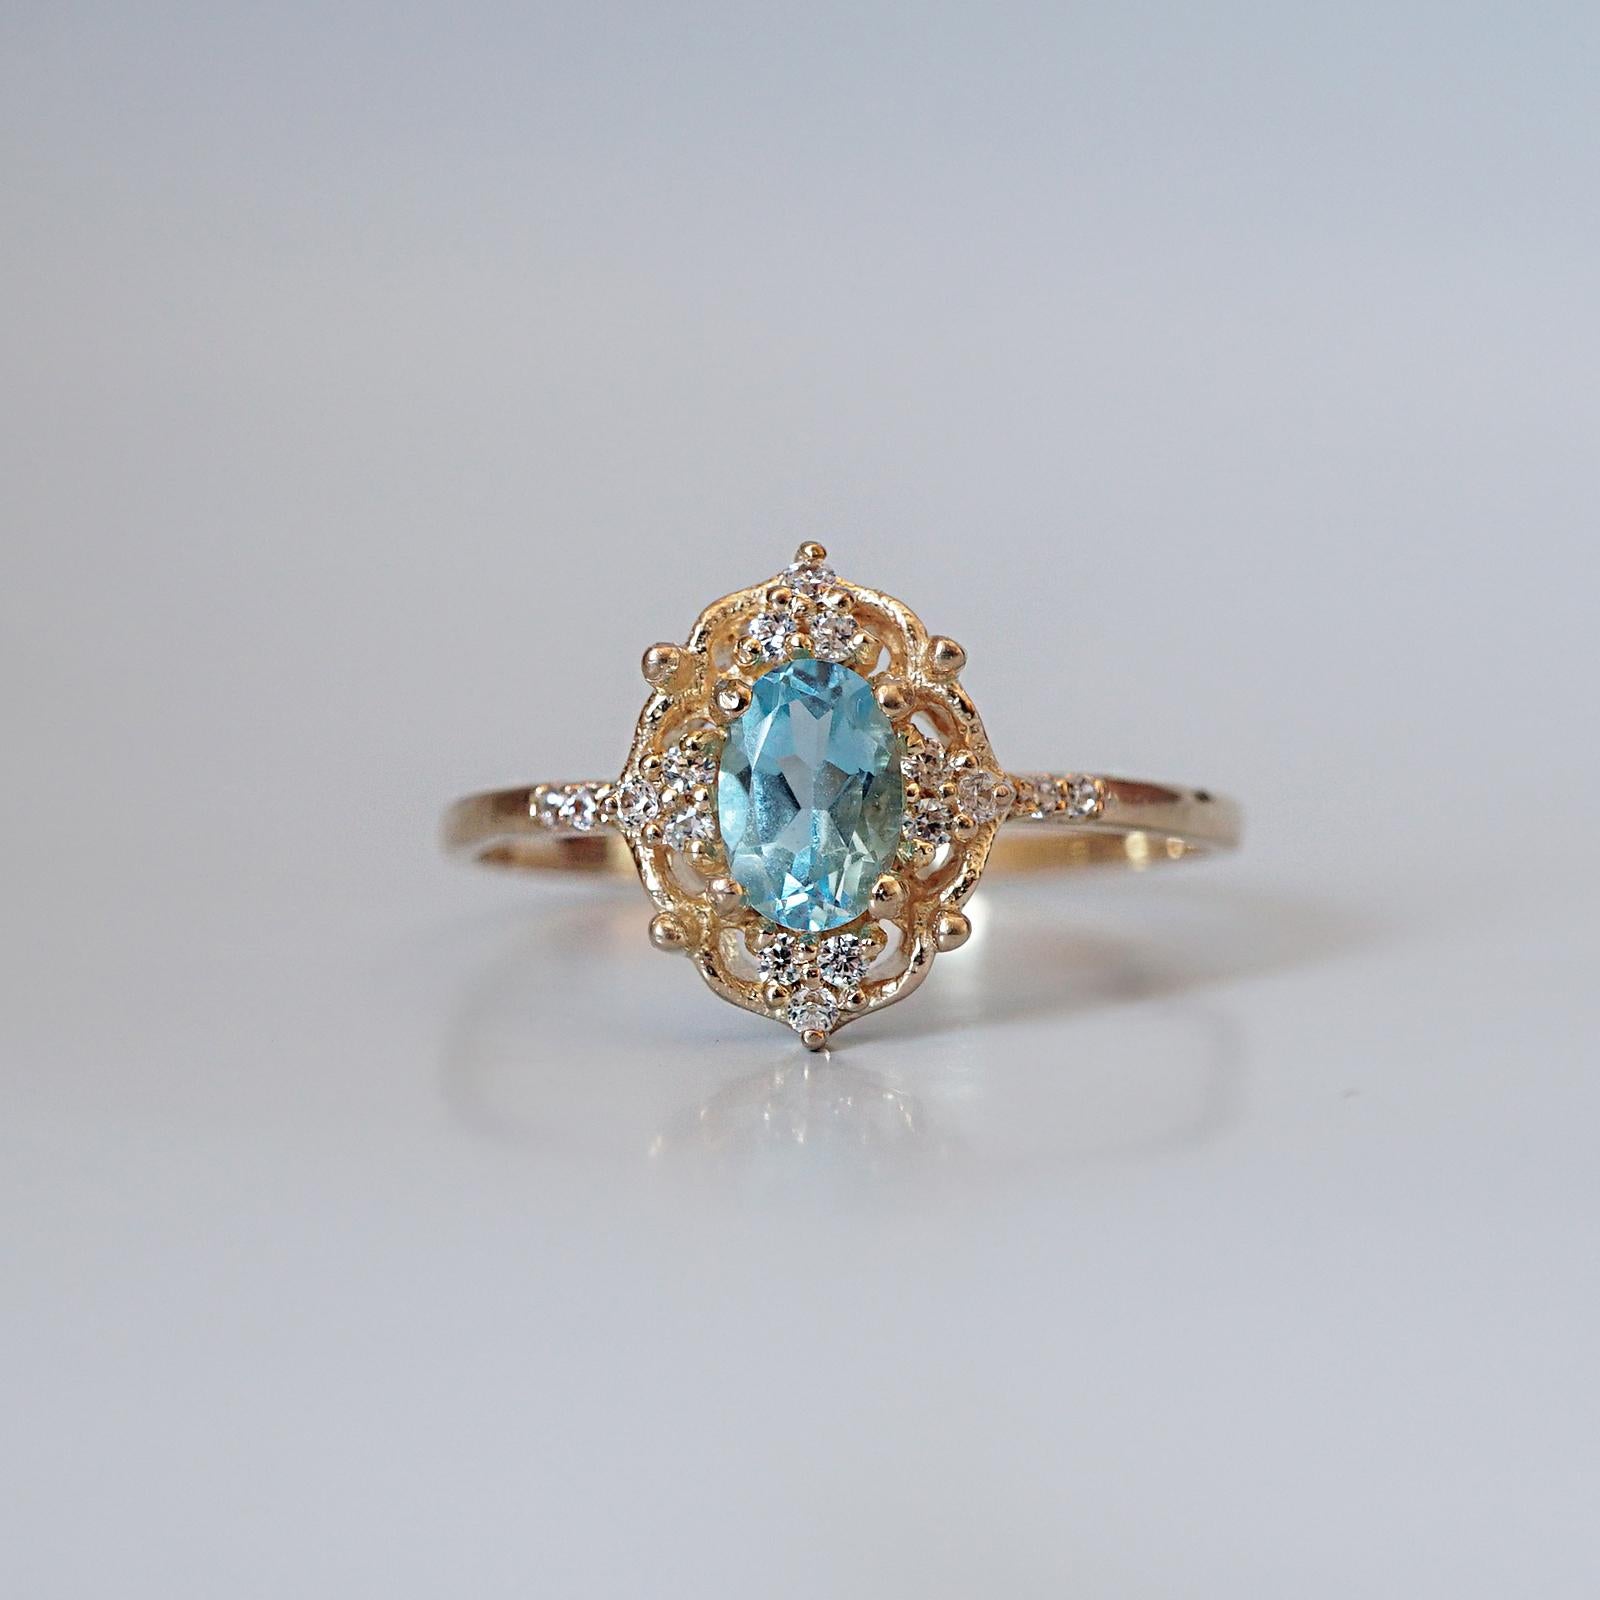 **This item is specially made for you. Please allow 1-2 week lead time. Make a note of your ring size during checkout. 

We all shine on like the moon and the stars and the sun.... Stare into the Cosmic Topaz ring and you might just see another